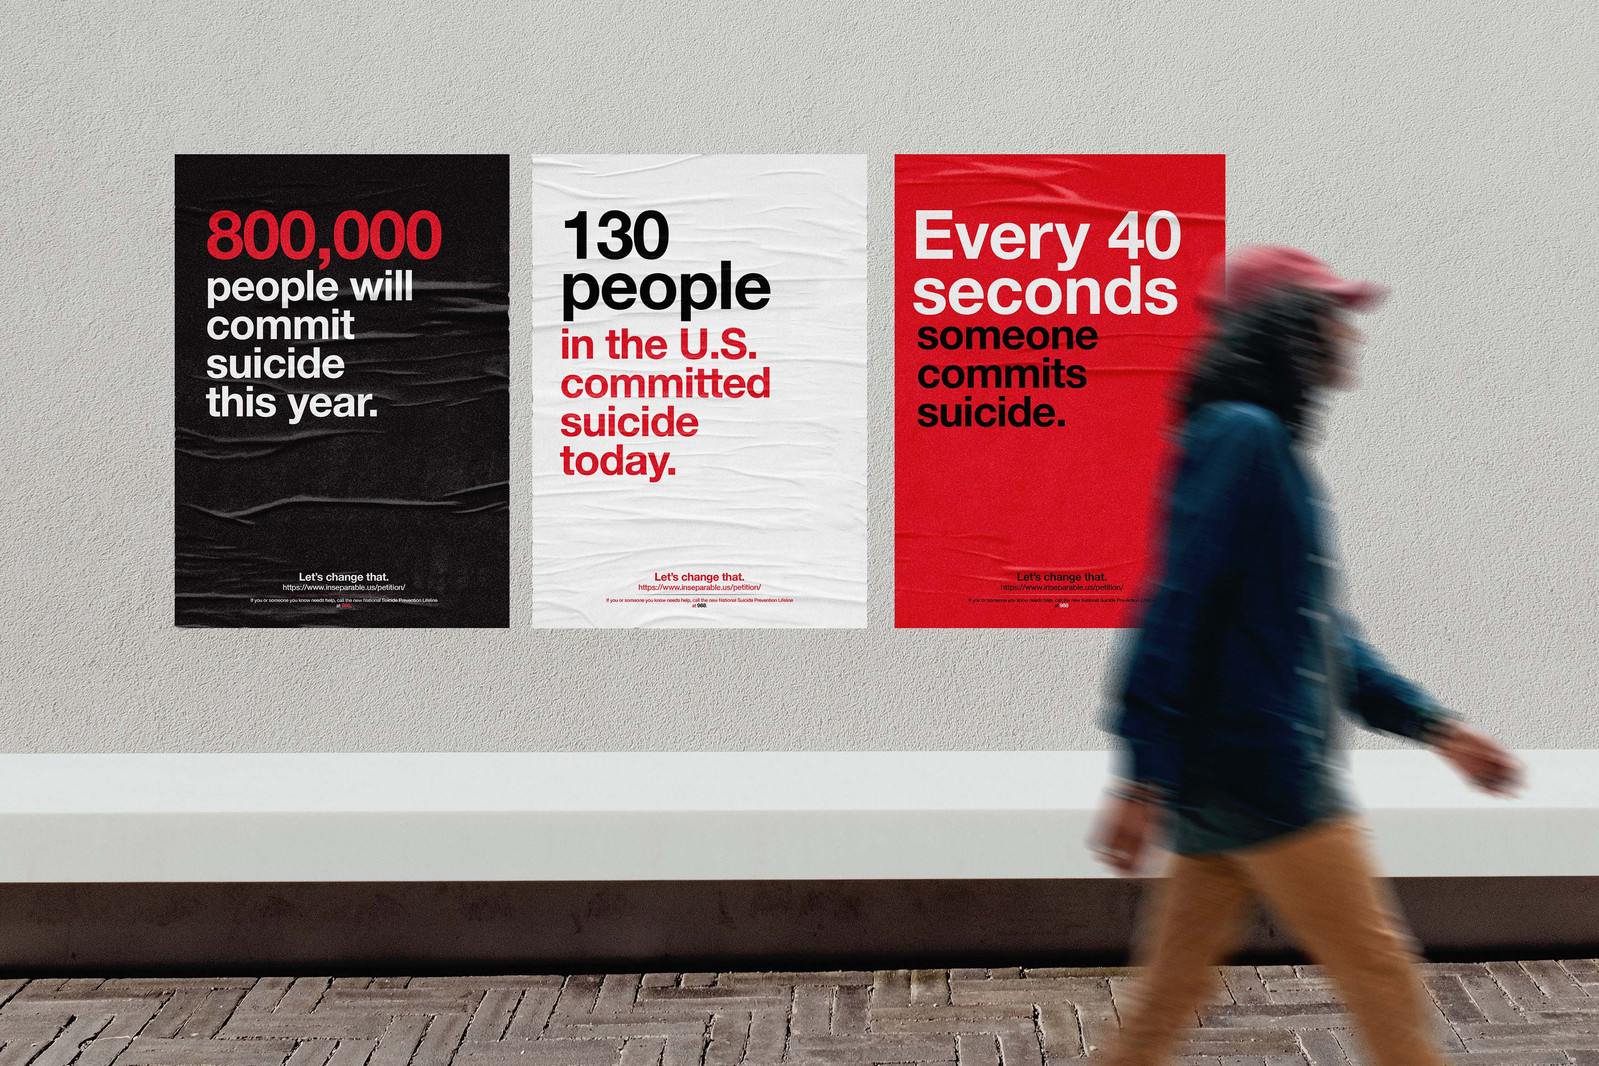 A three-poster series, first black with red and white type, second white with red and black type, third red with black and white type, pasted on a wall with varying facts on suicide rates.